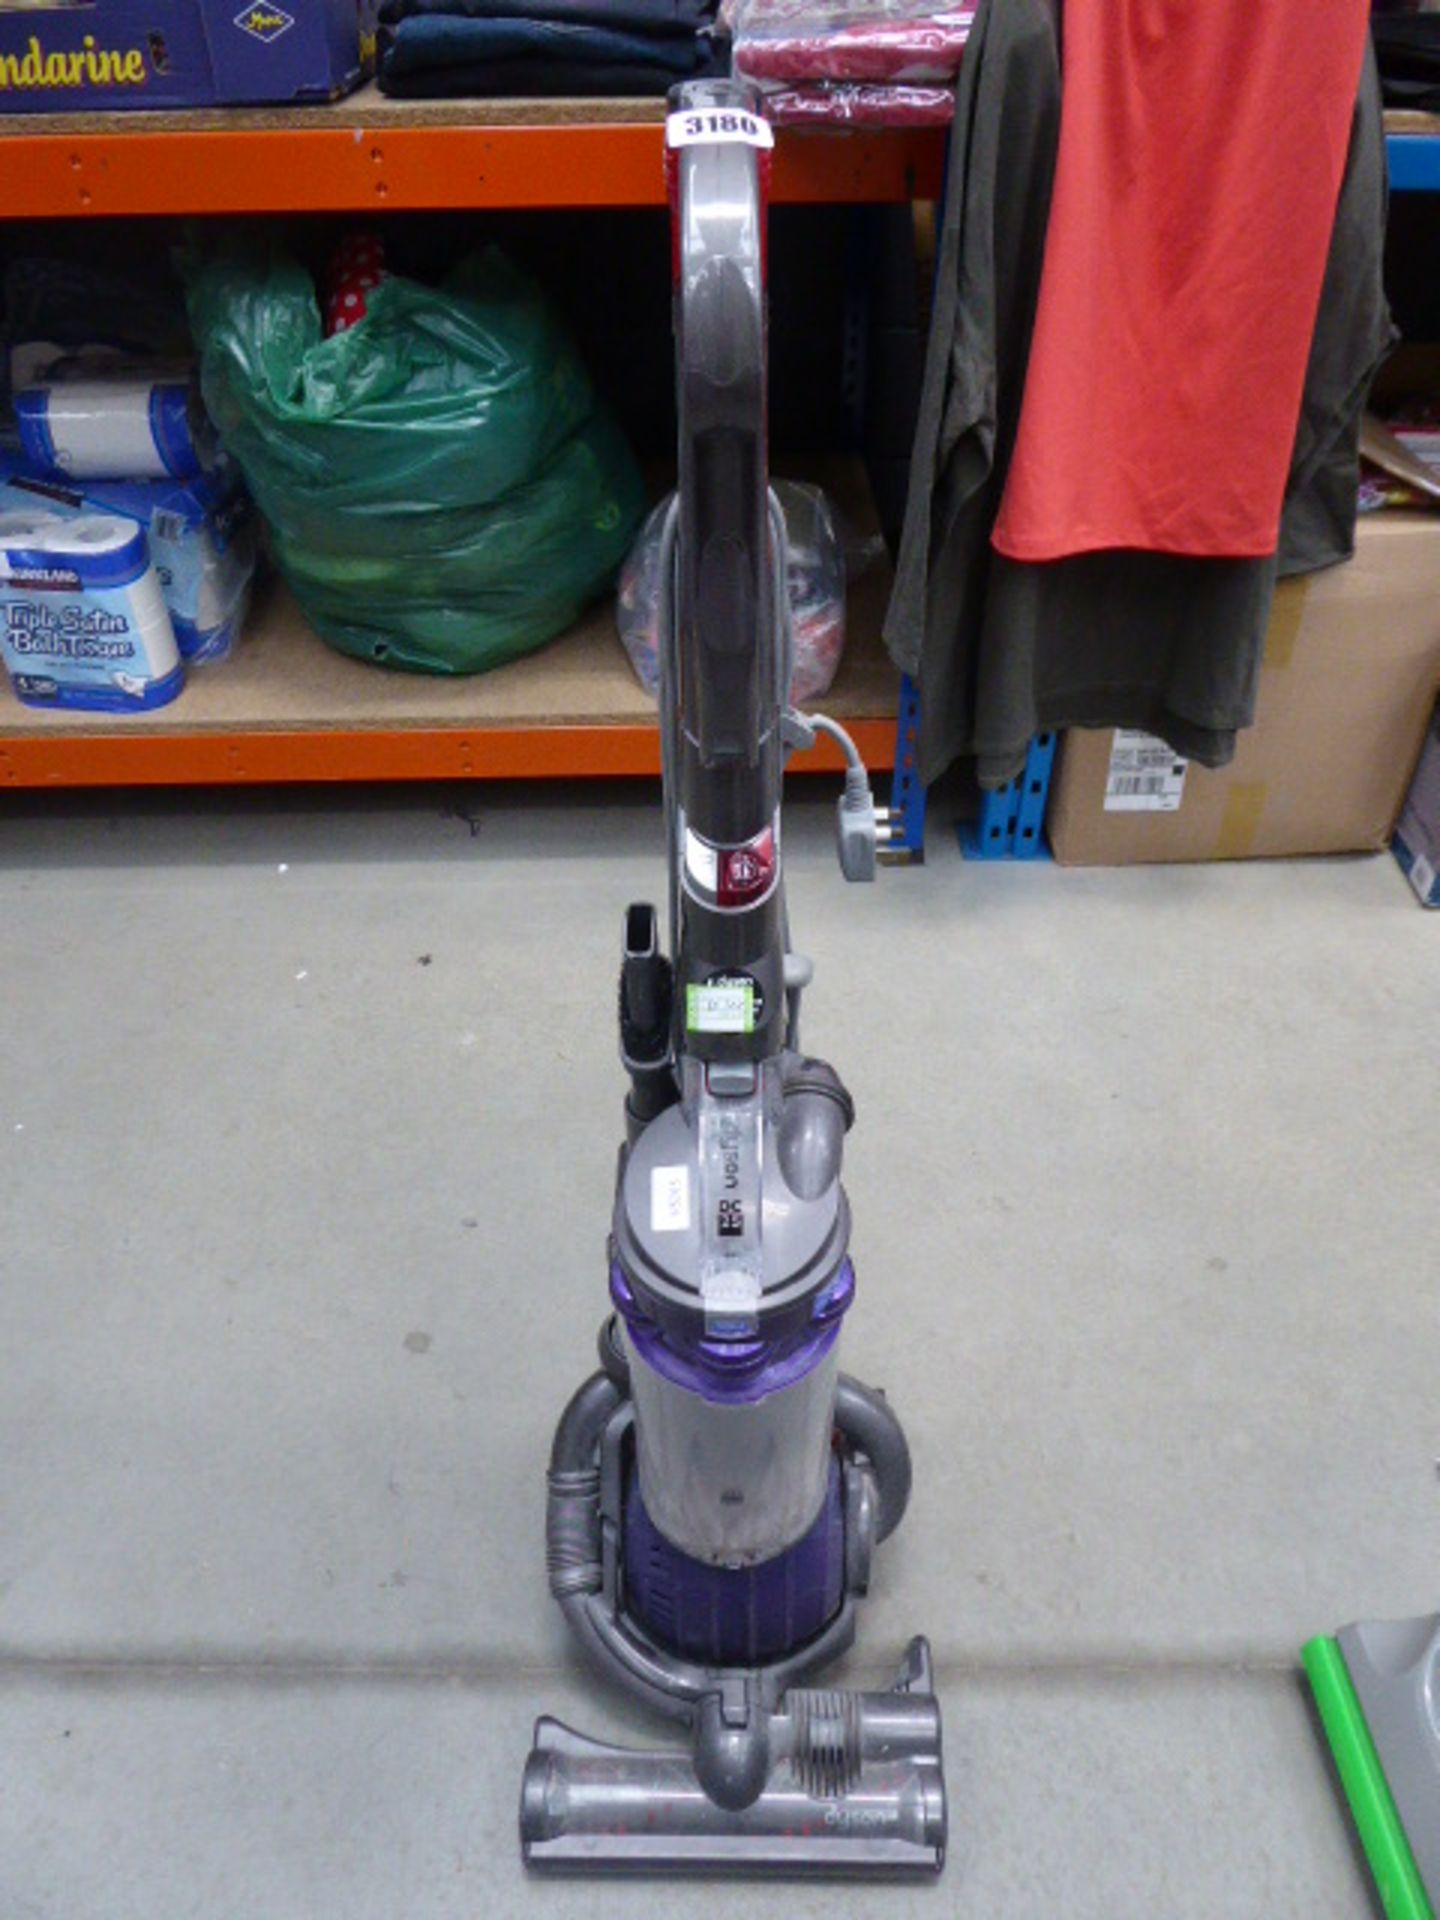 (TN104) Dyson upright DC25 vacuum cleaner, plus an upright Vax steam hard floor cleaner